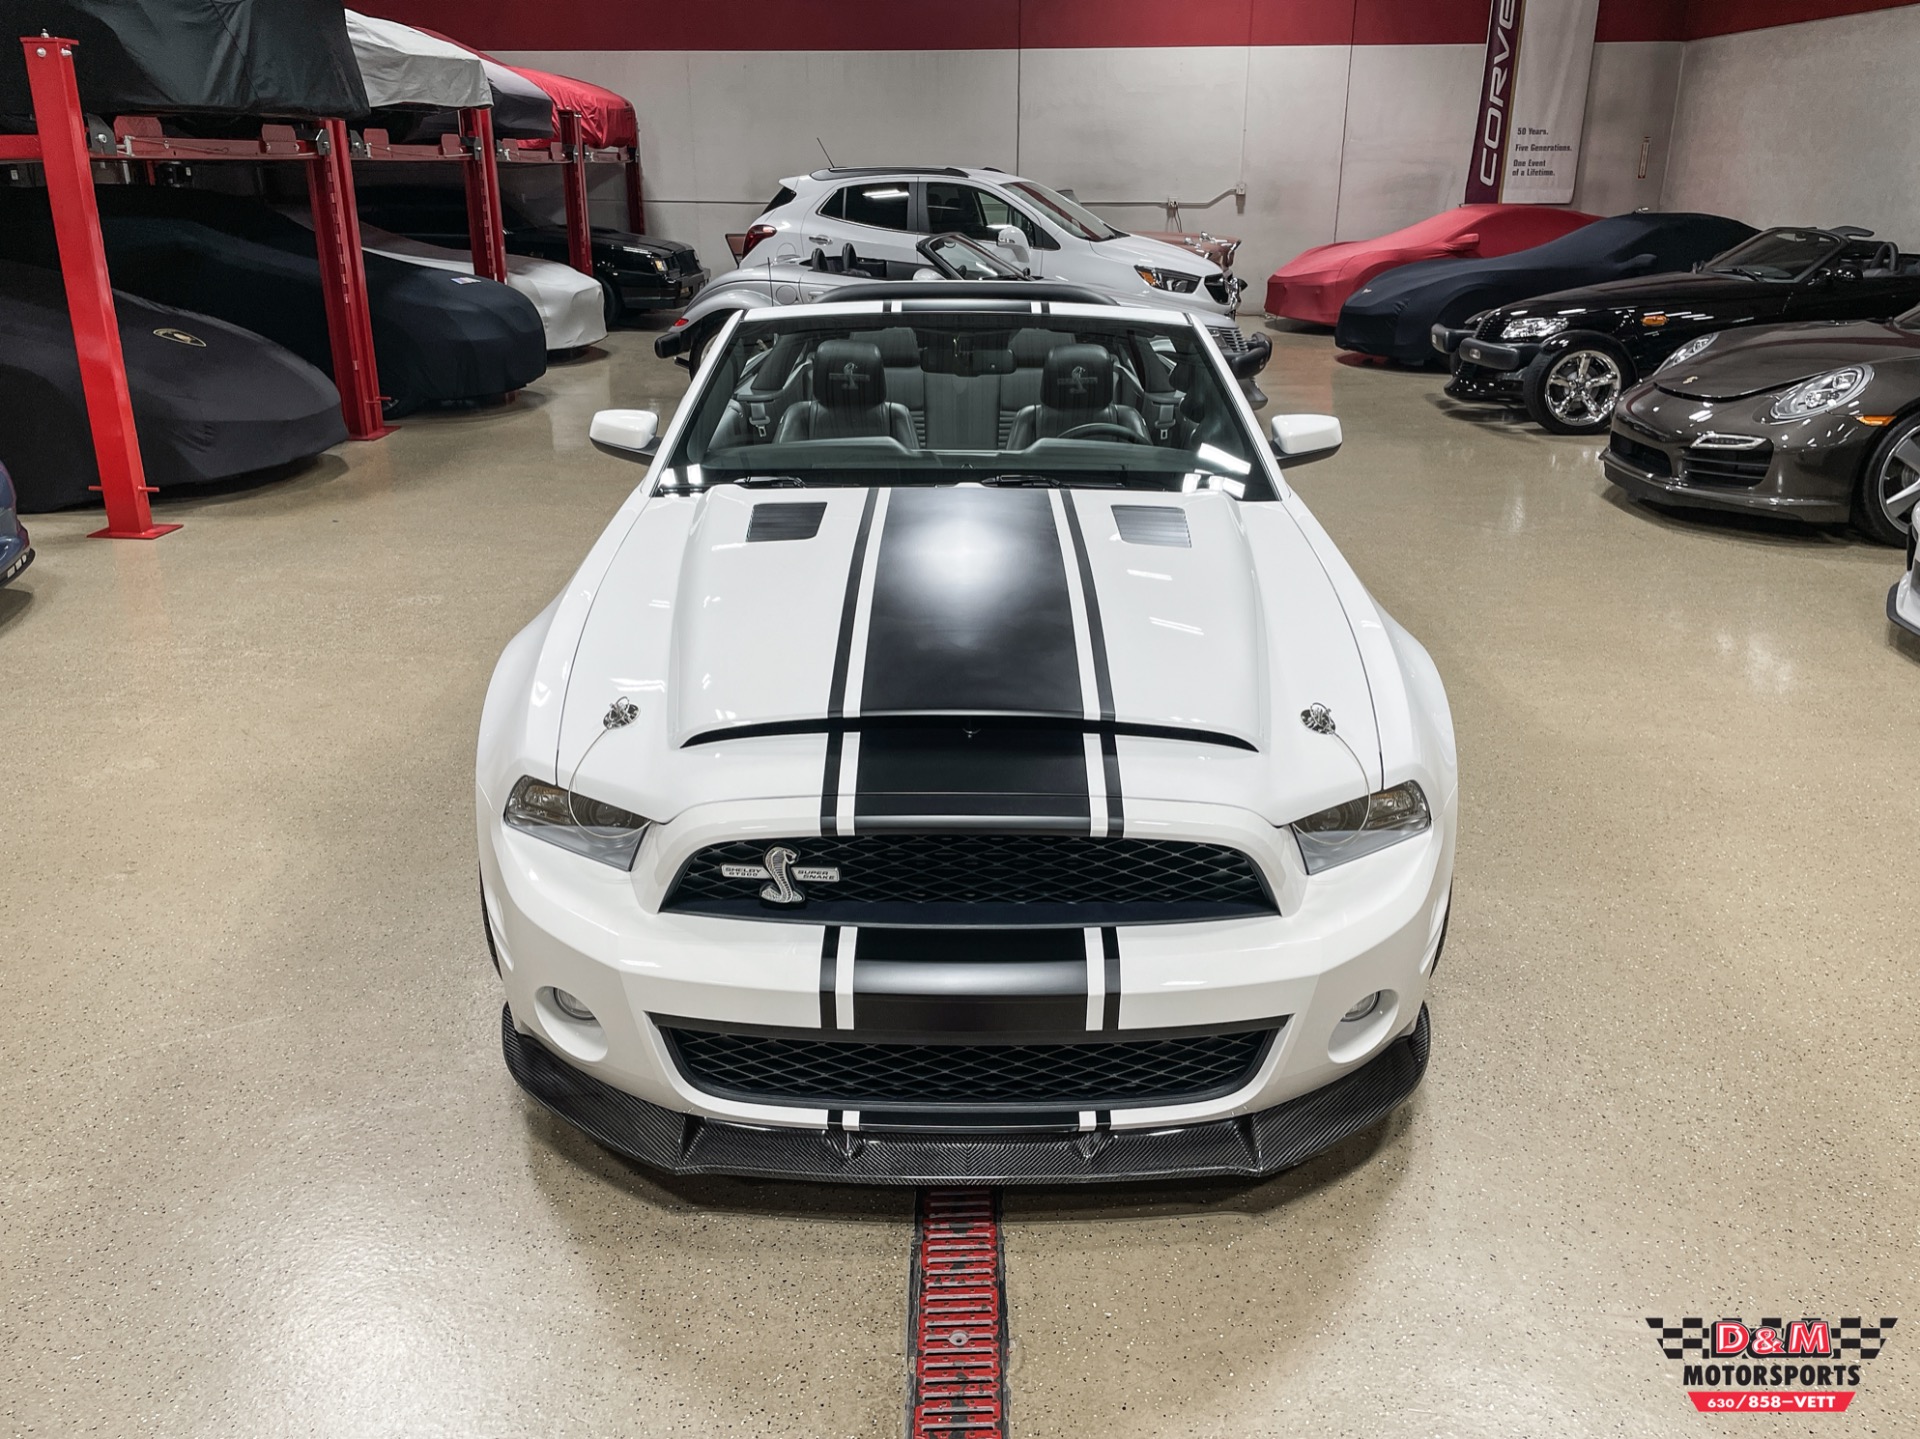 Used 2011 Ford Shelby GT500 Super Snake Convertible | Glen Ellyn, IL